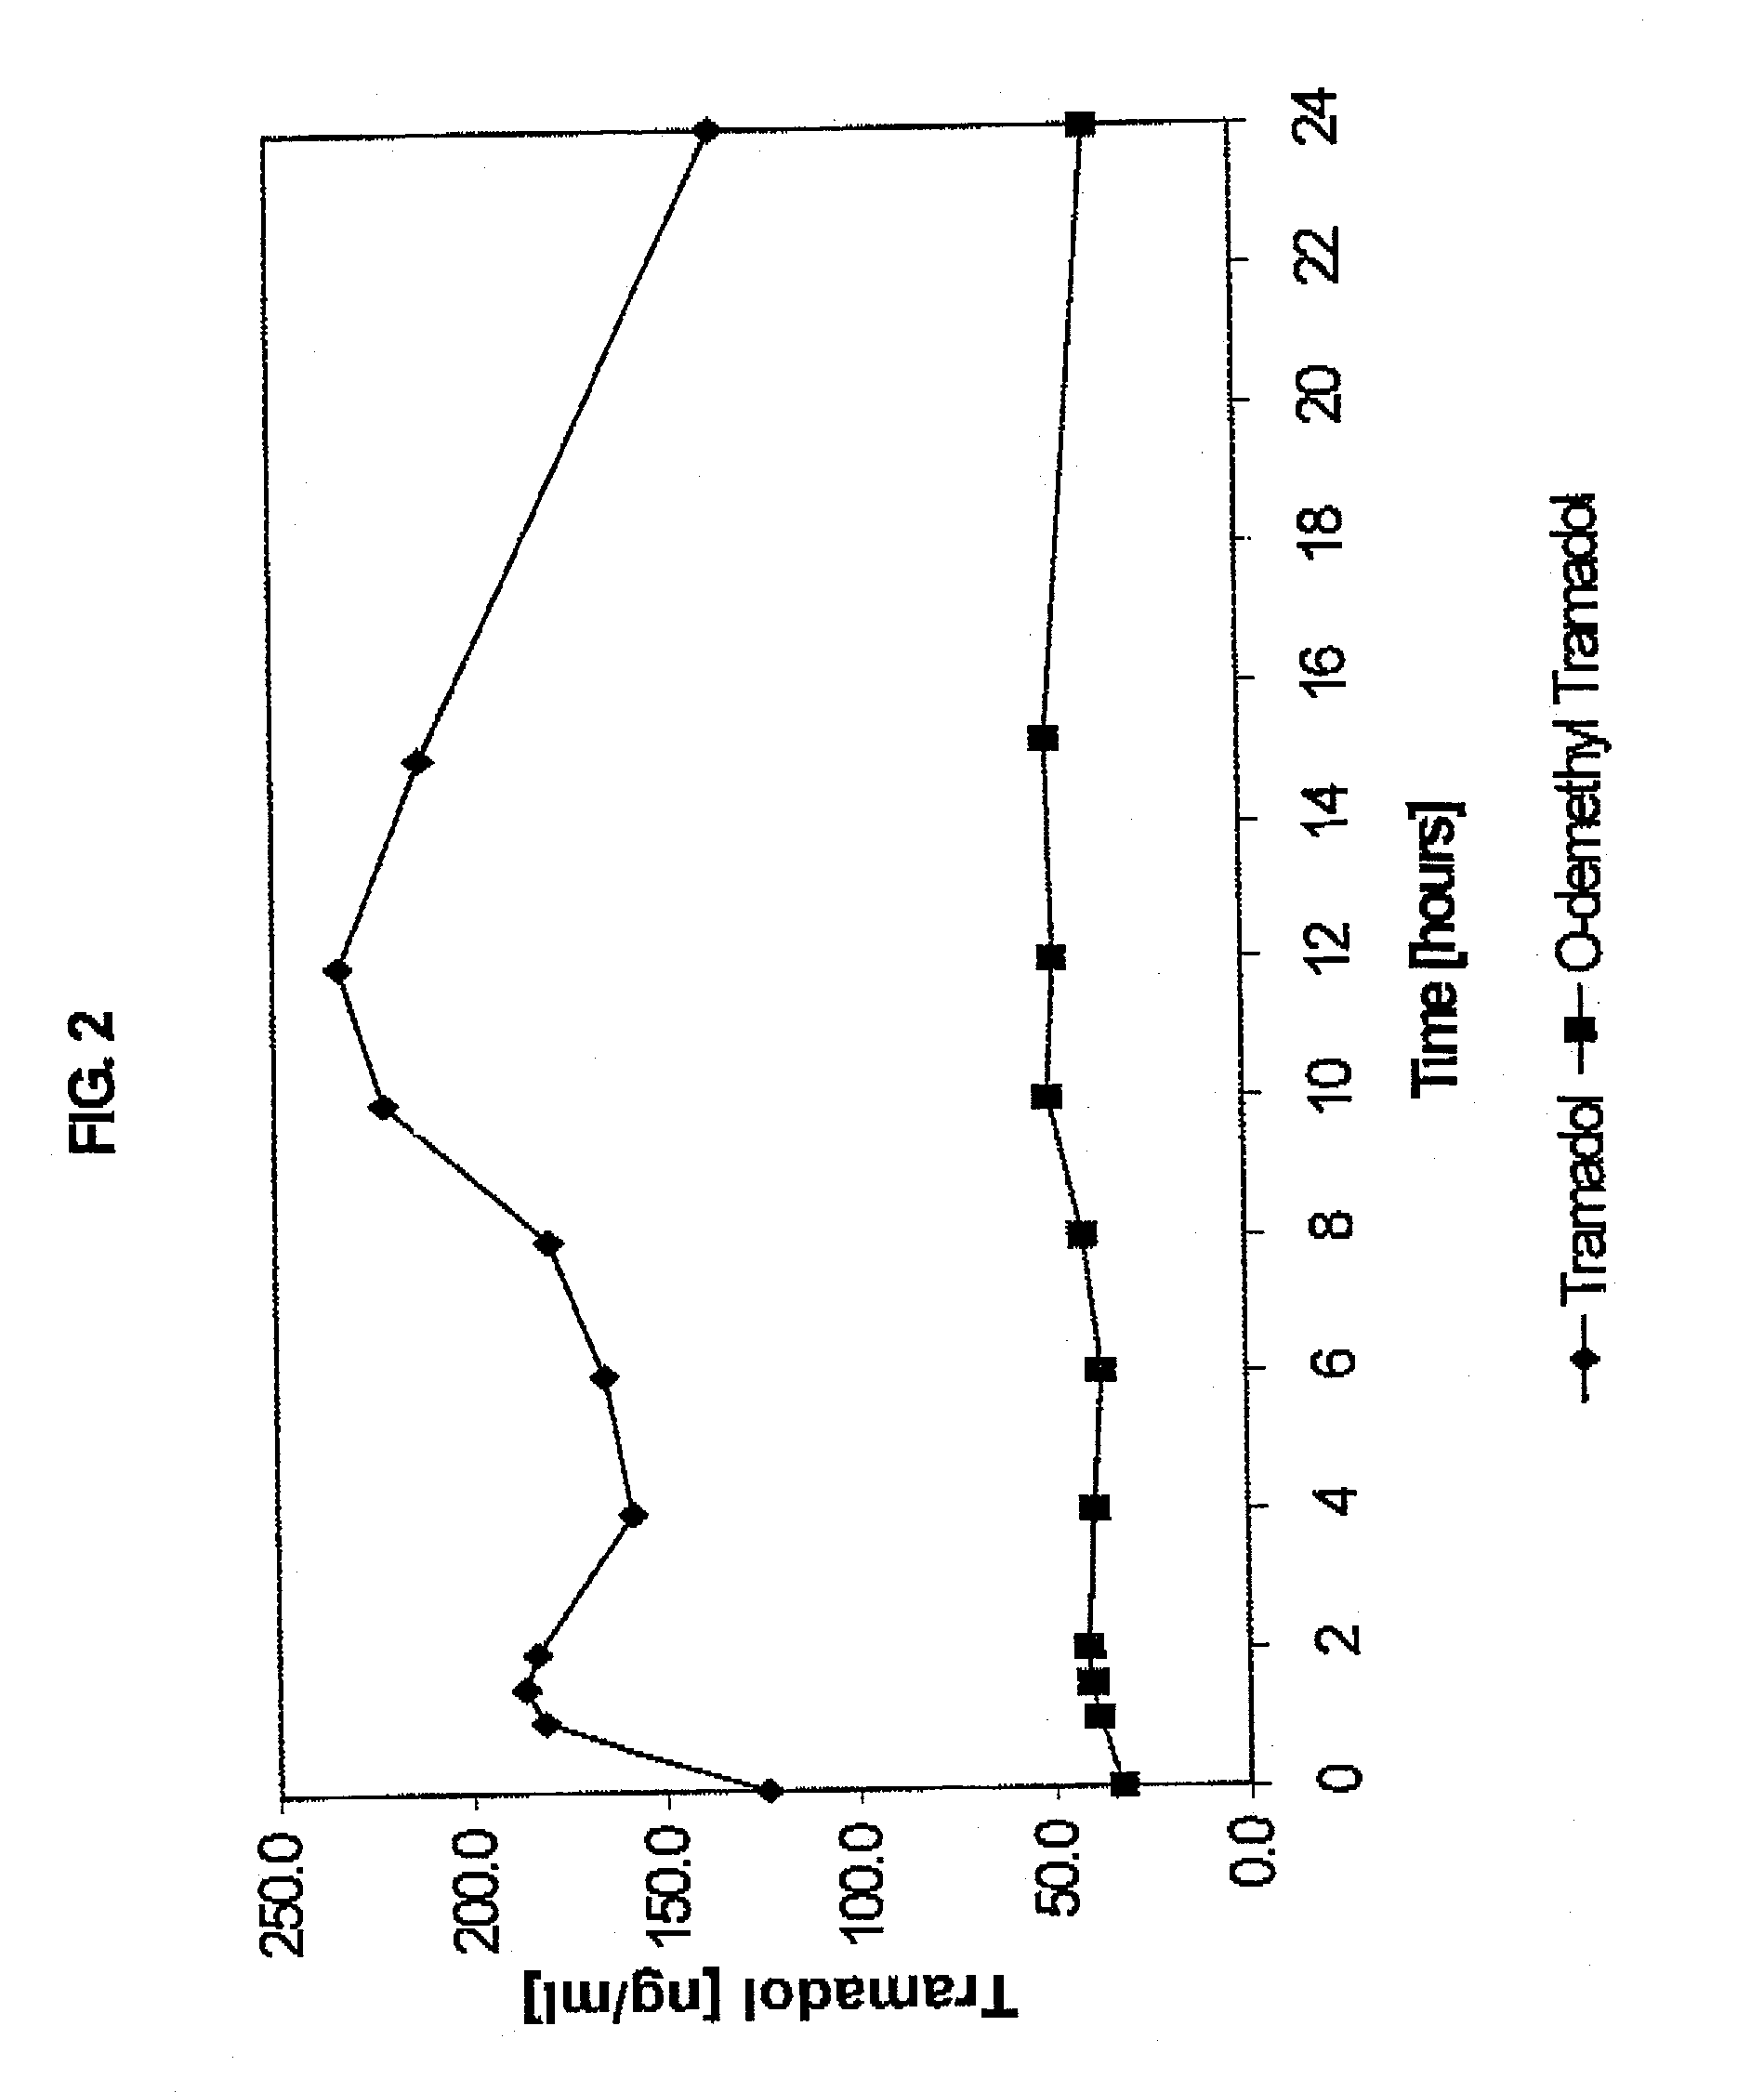 Extended release composition containing Tramadol